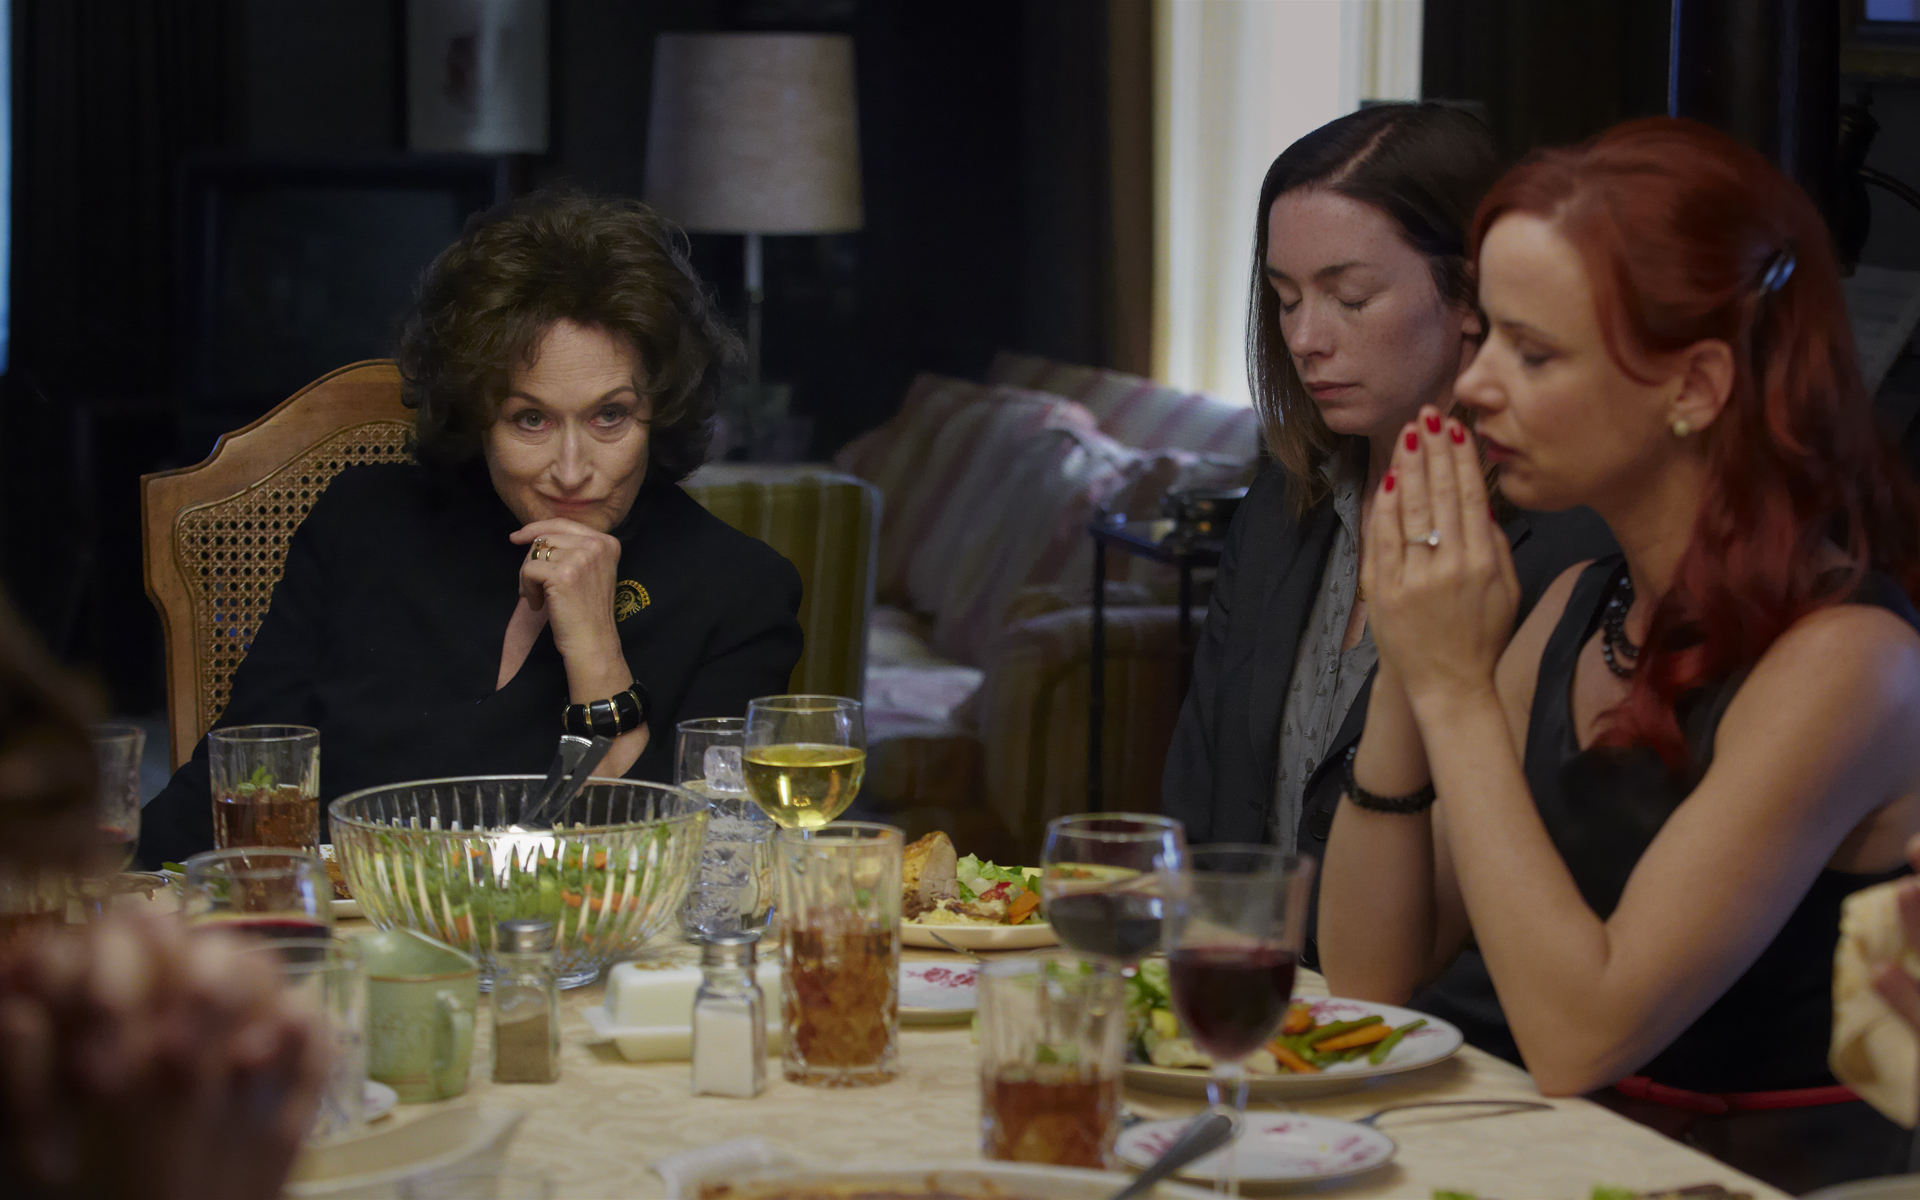 August: Osage County ©2014 Weinstein Company